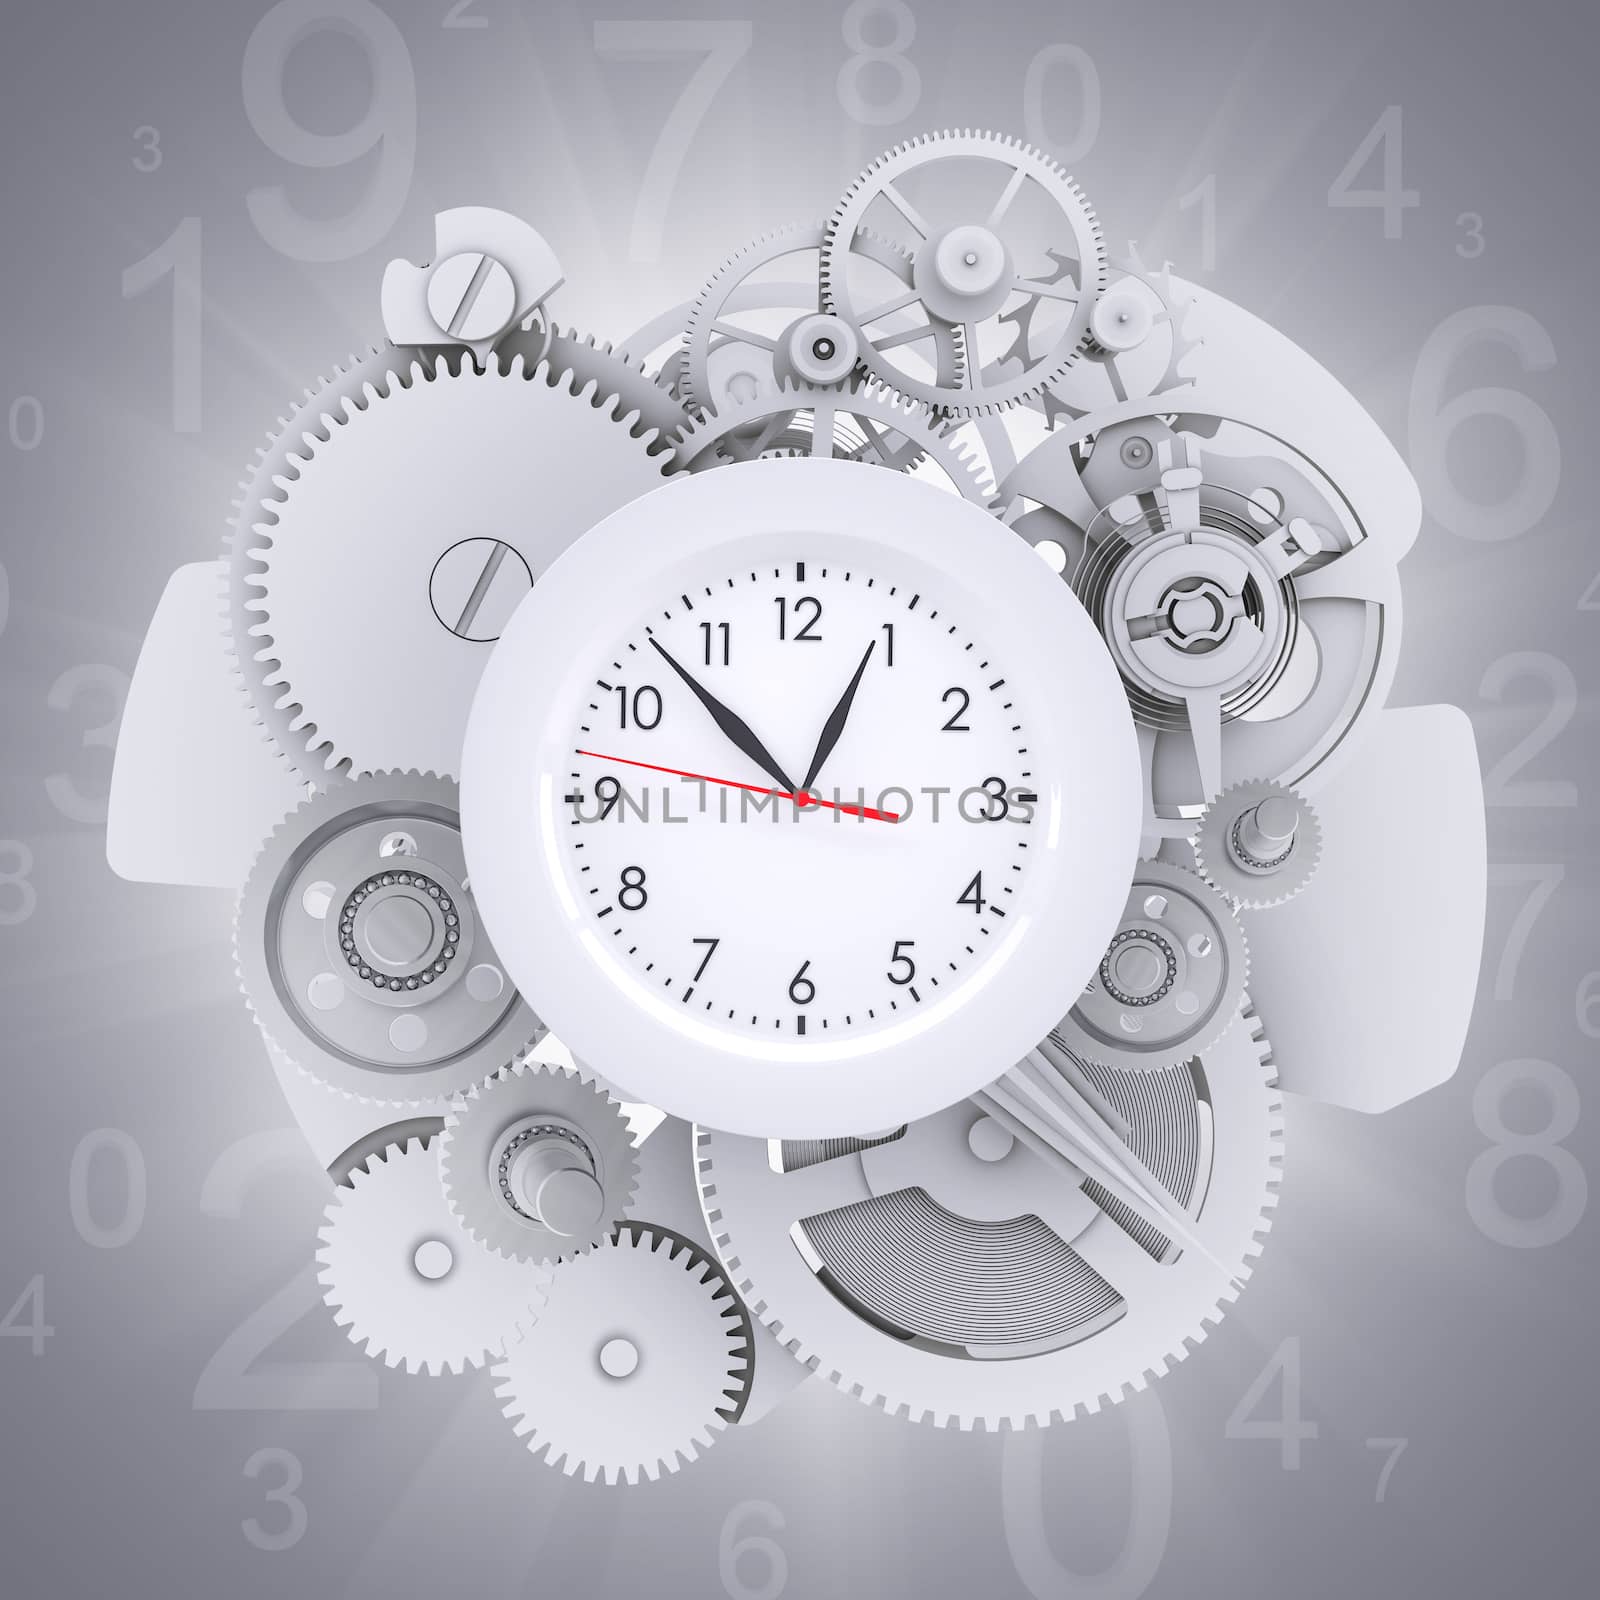 Clock face with figures and white gears. Green background